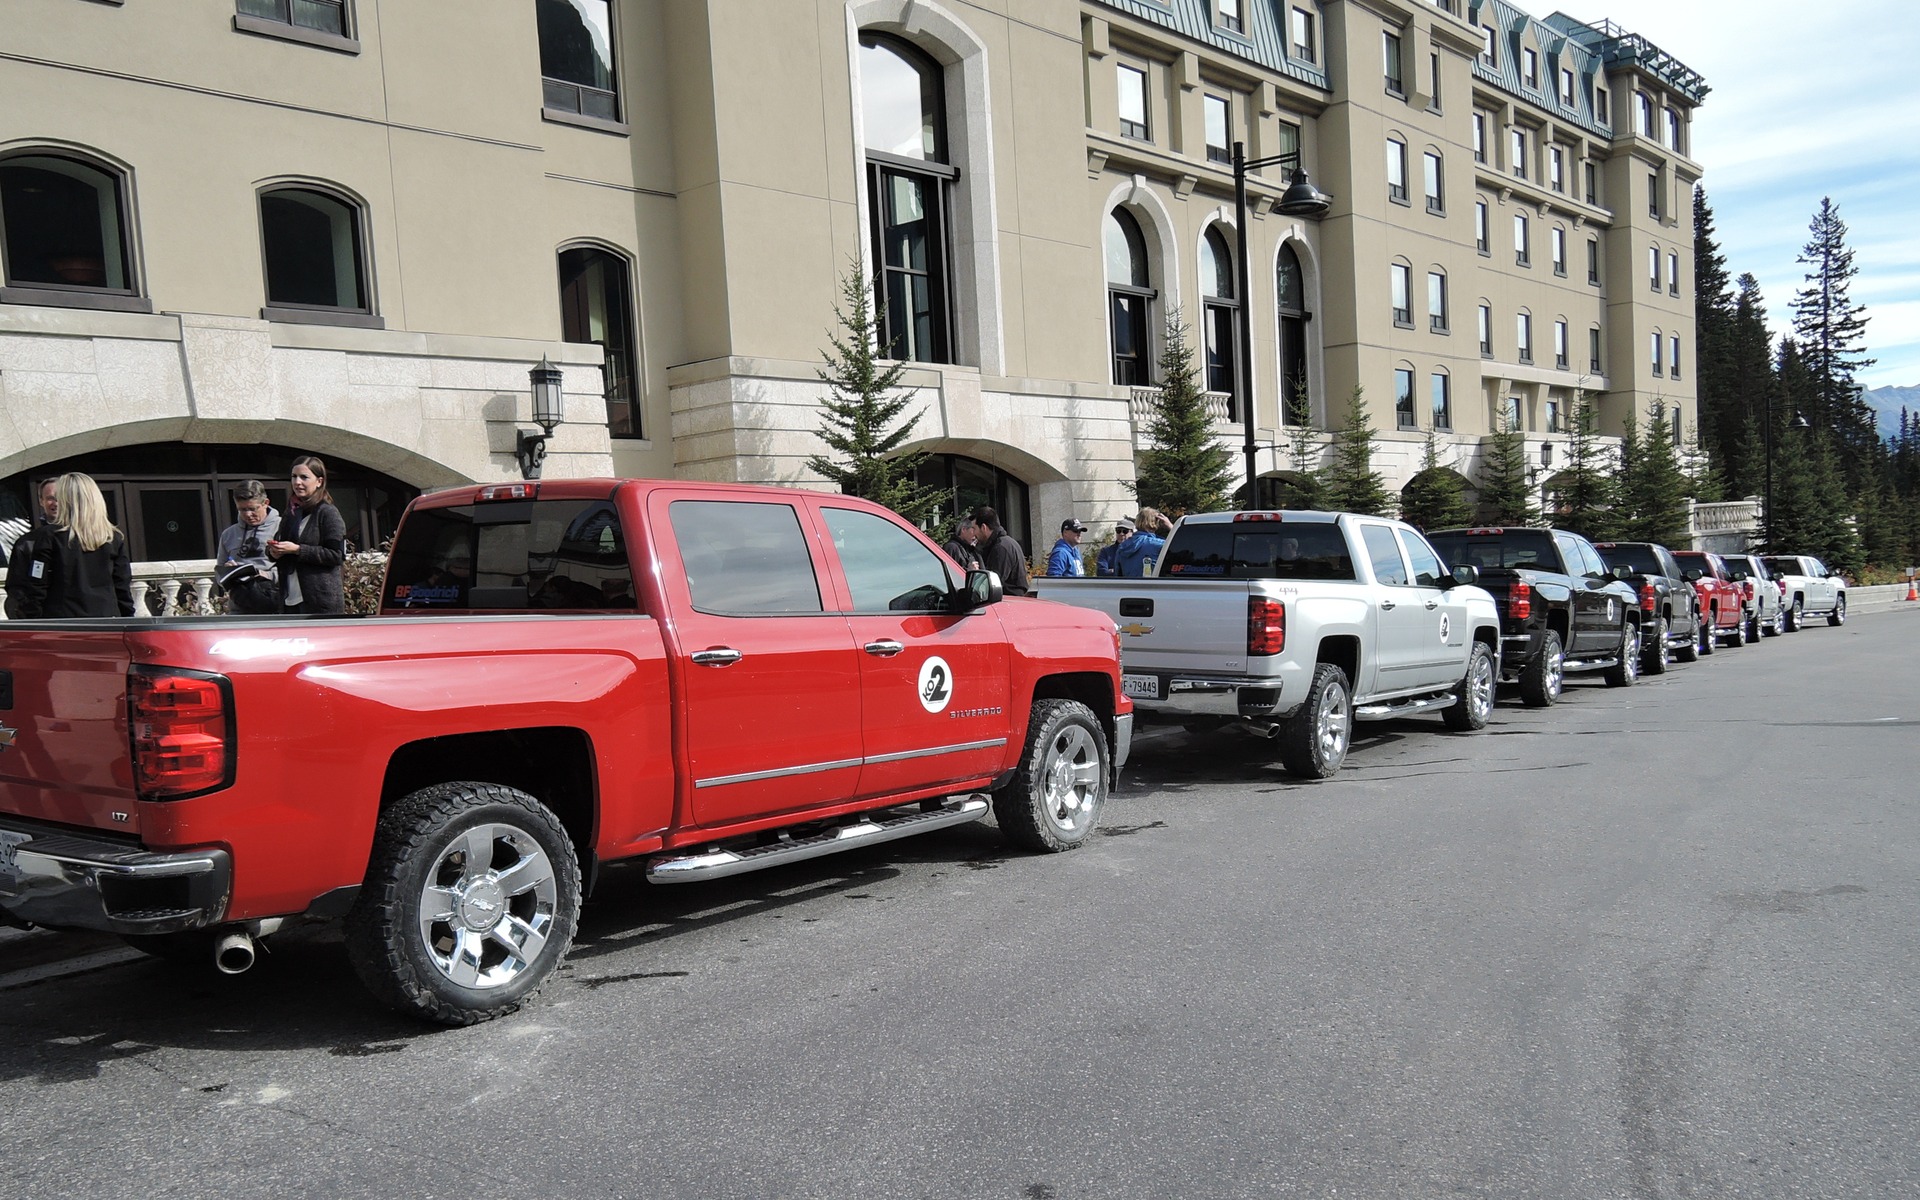 The test vehicles in front of Chateau Lake Louise.